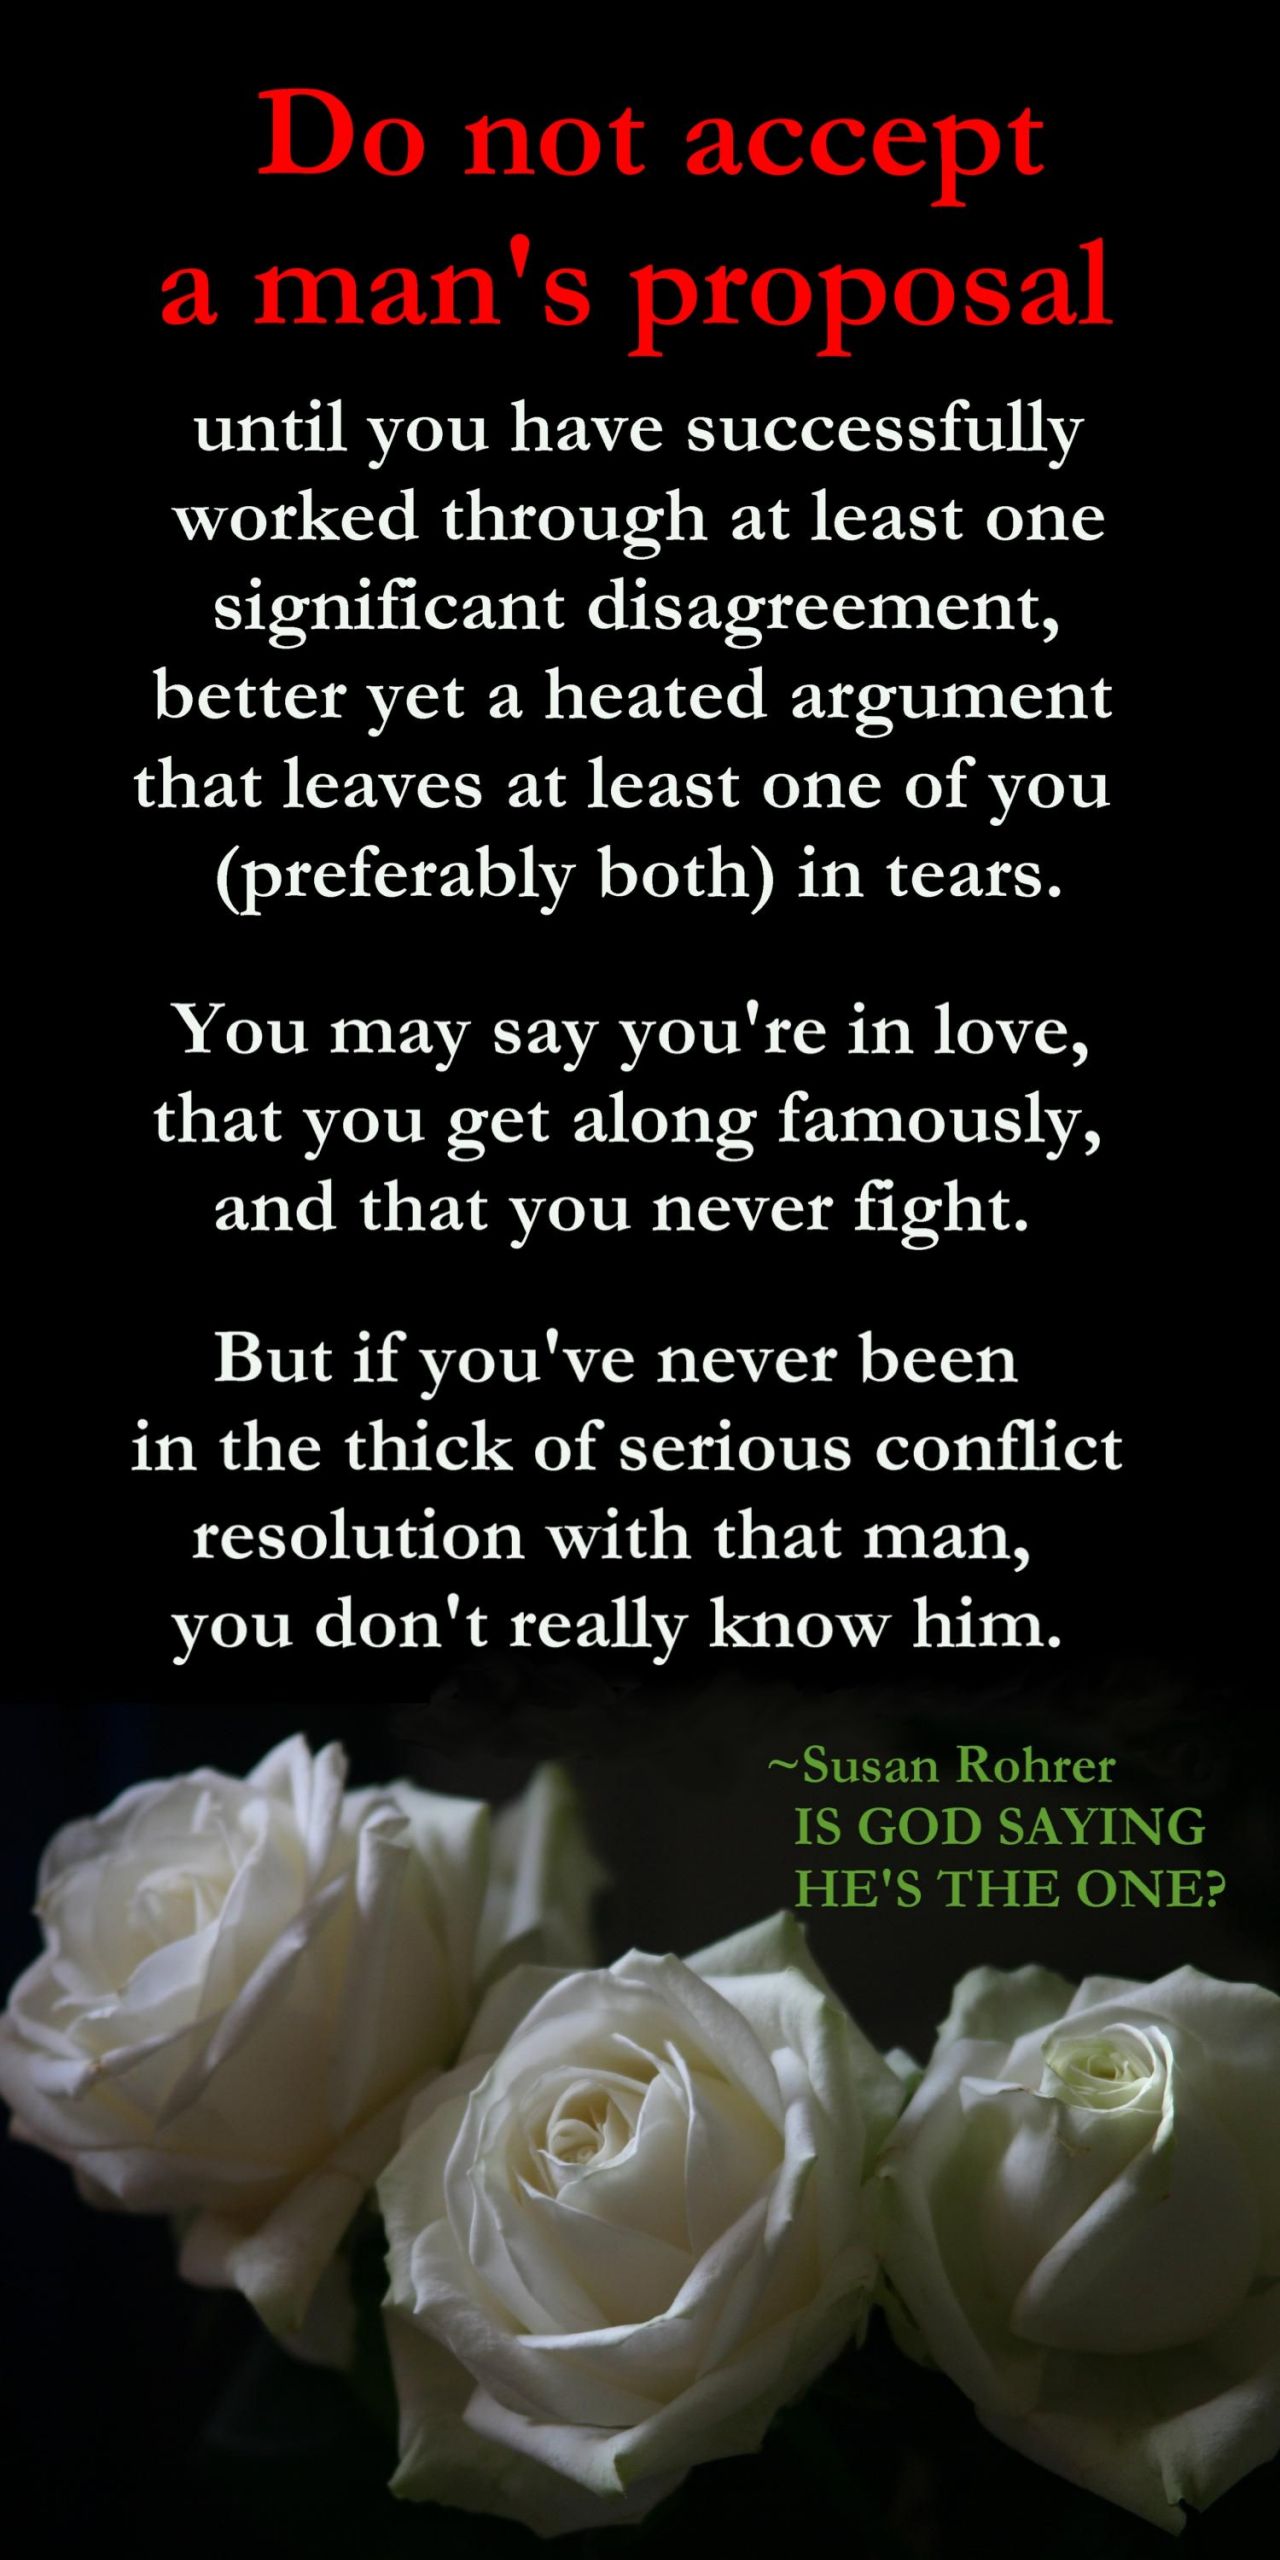 Christian Relationship Quotes
 Pin by Susan Rohrer on Relationship Advice Finding The